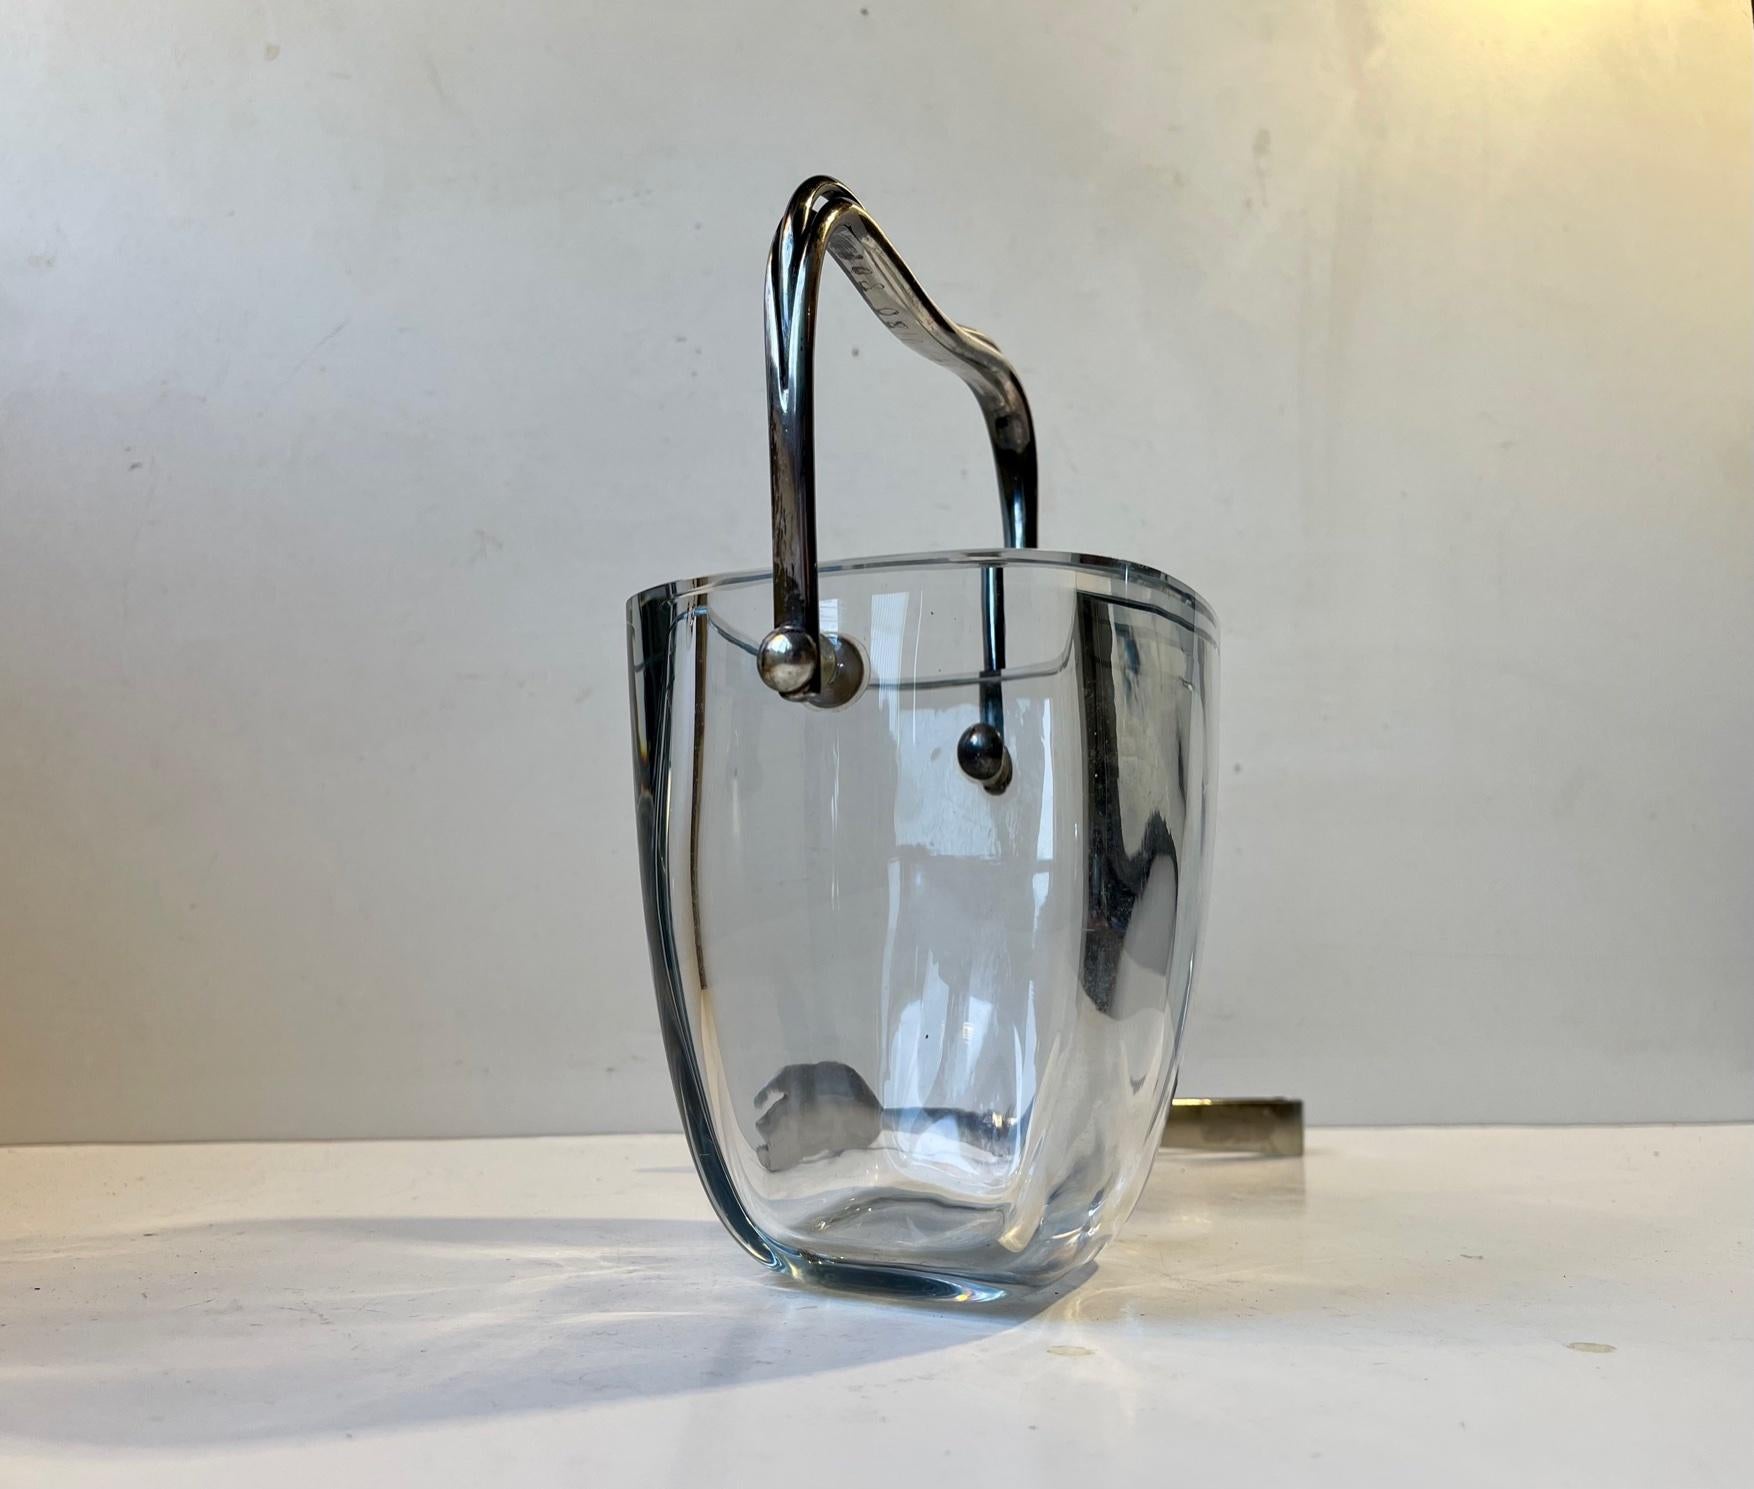 Strömbergshyttan ice bucket with hand made sterling handles. Crafted of Strömbergshyttan glass with it's characteristic light blue hue. The handles are made from solid sterling silver and features a partially split stylish 3-armed design . Vaguely